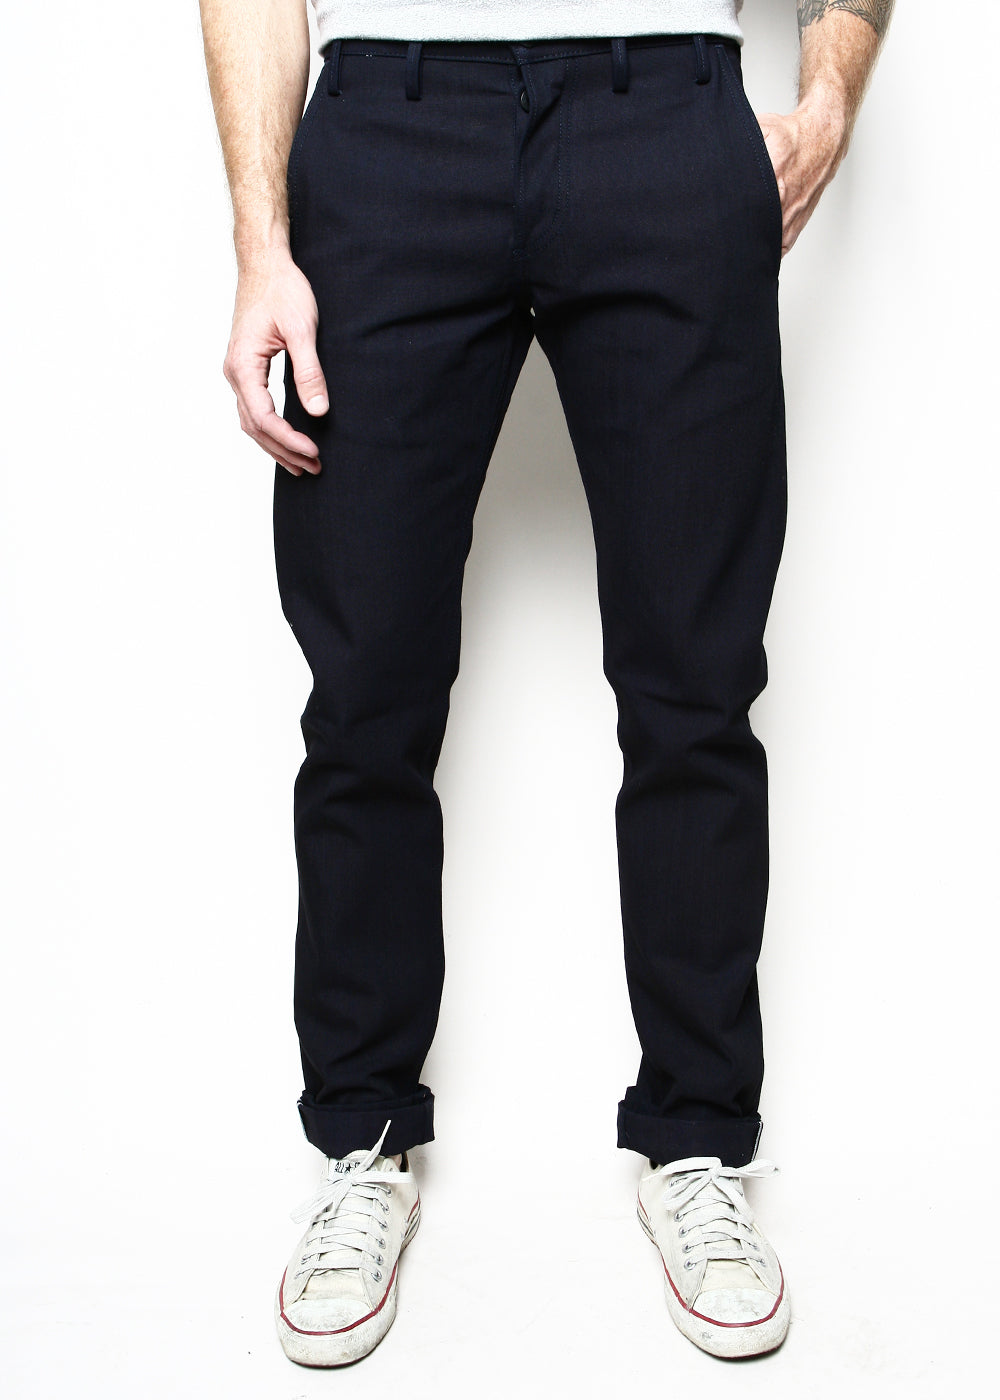 Officer Trousers // Indigo Selvedge Canvas – Rogue Territory